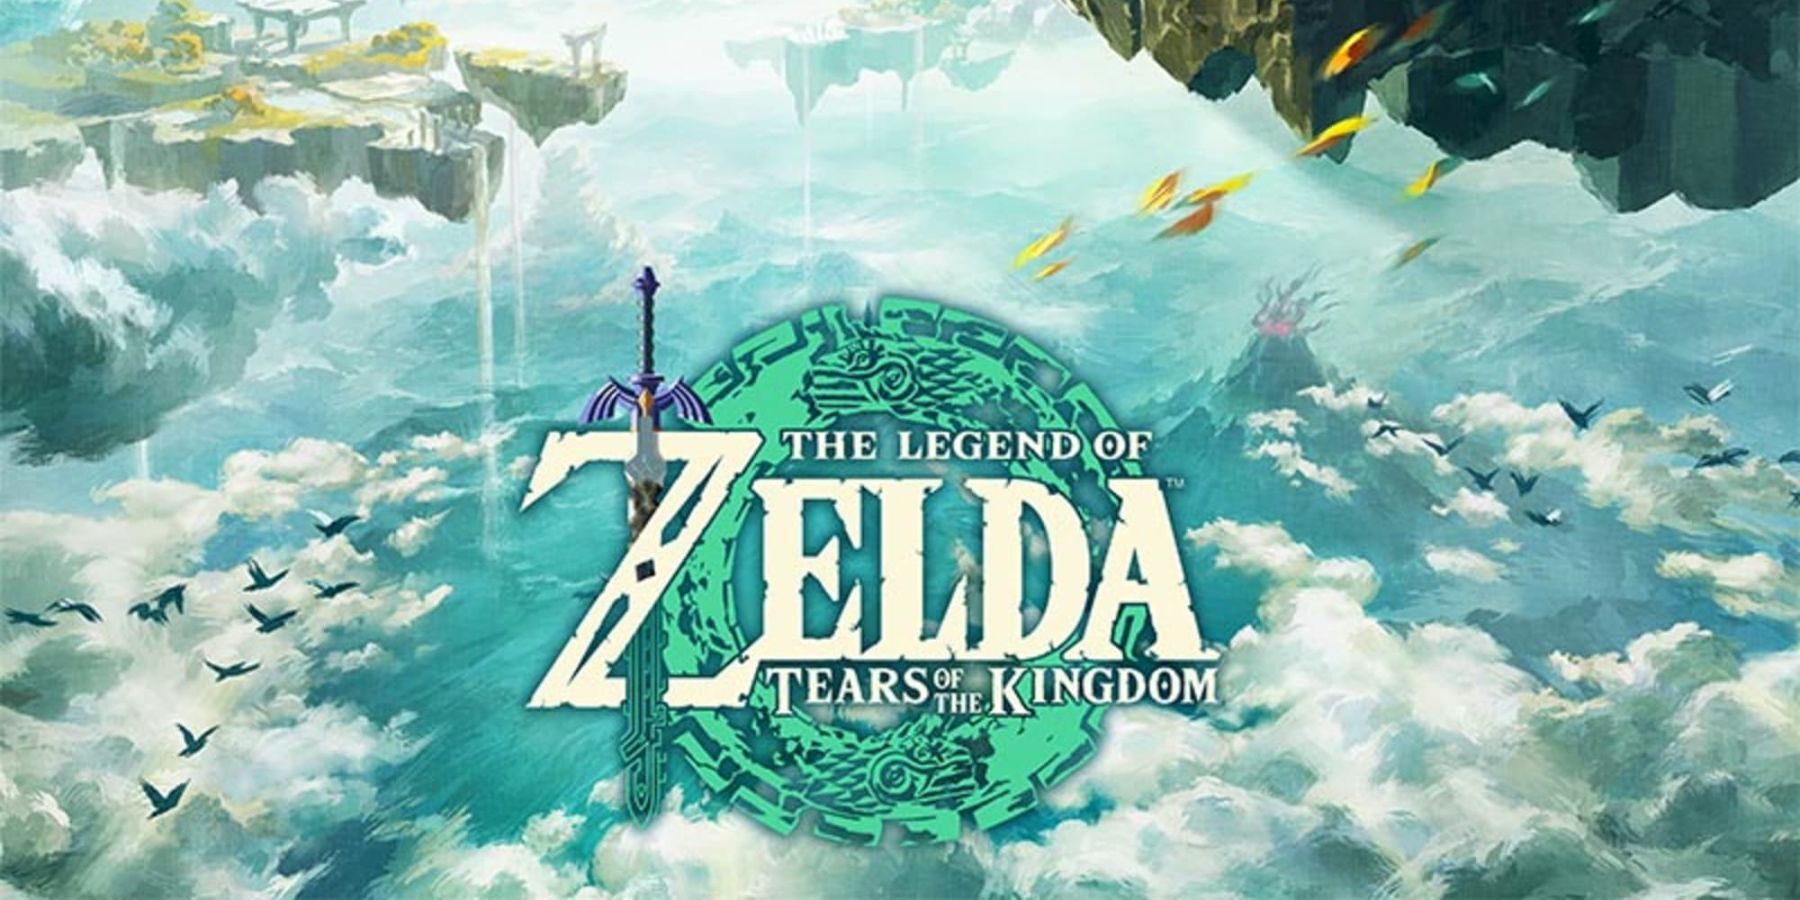 The Legend Of Zelda: Tears Of The Kingdom's Metascore Indicates A